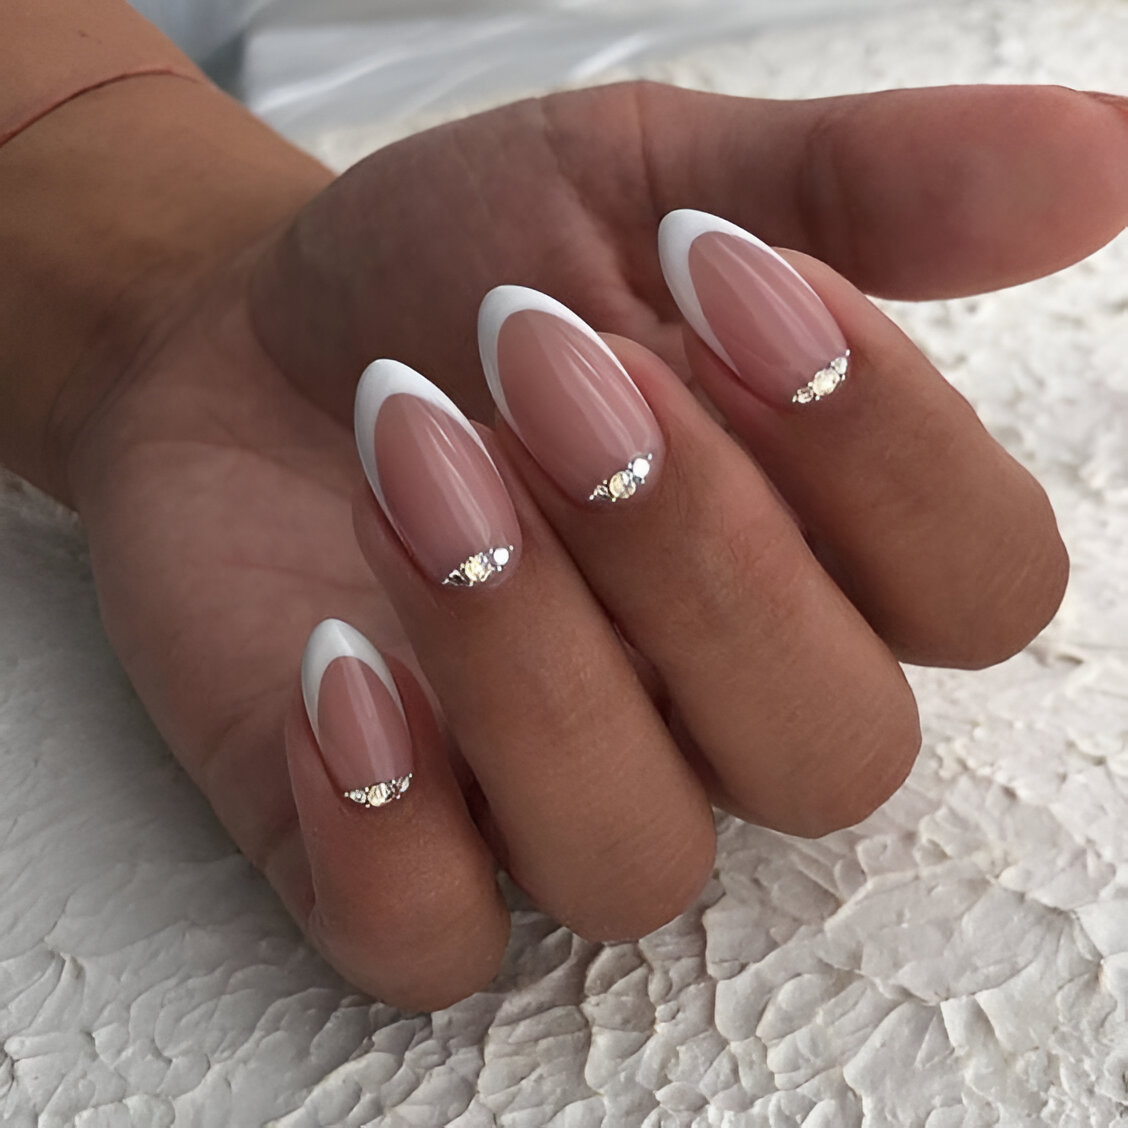 Short Almond French Tips 9